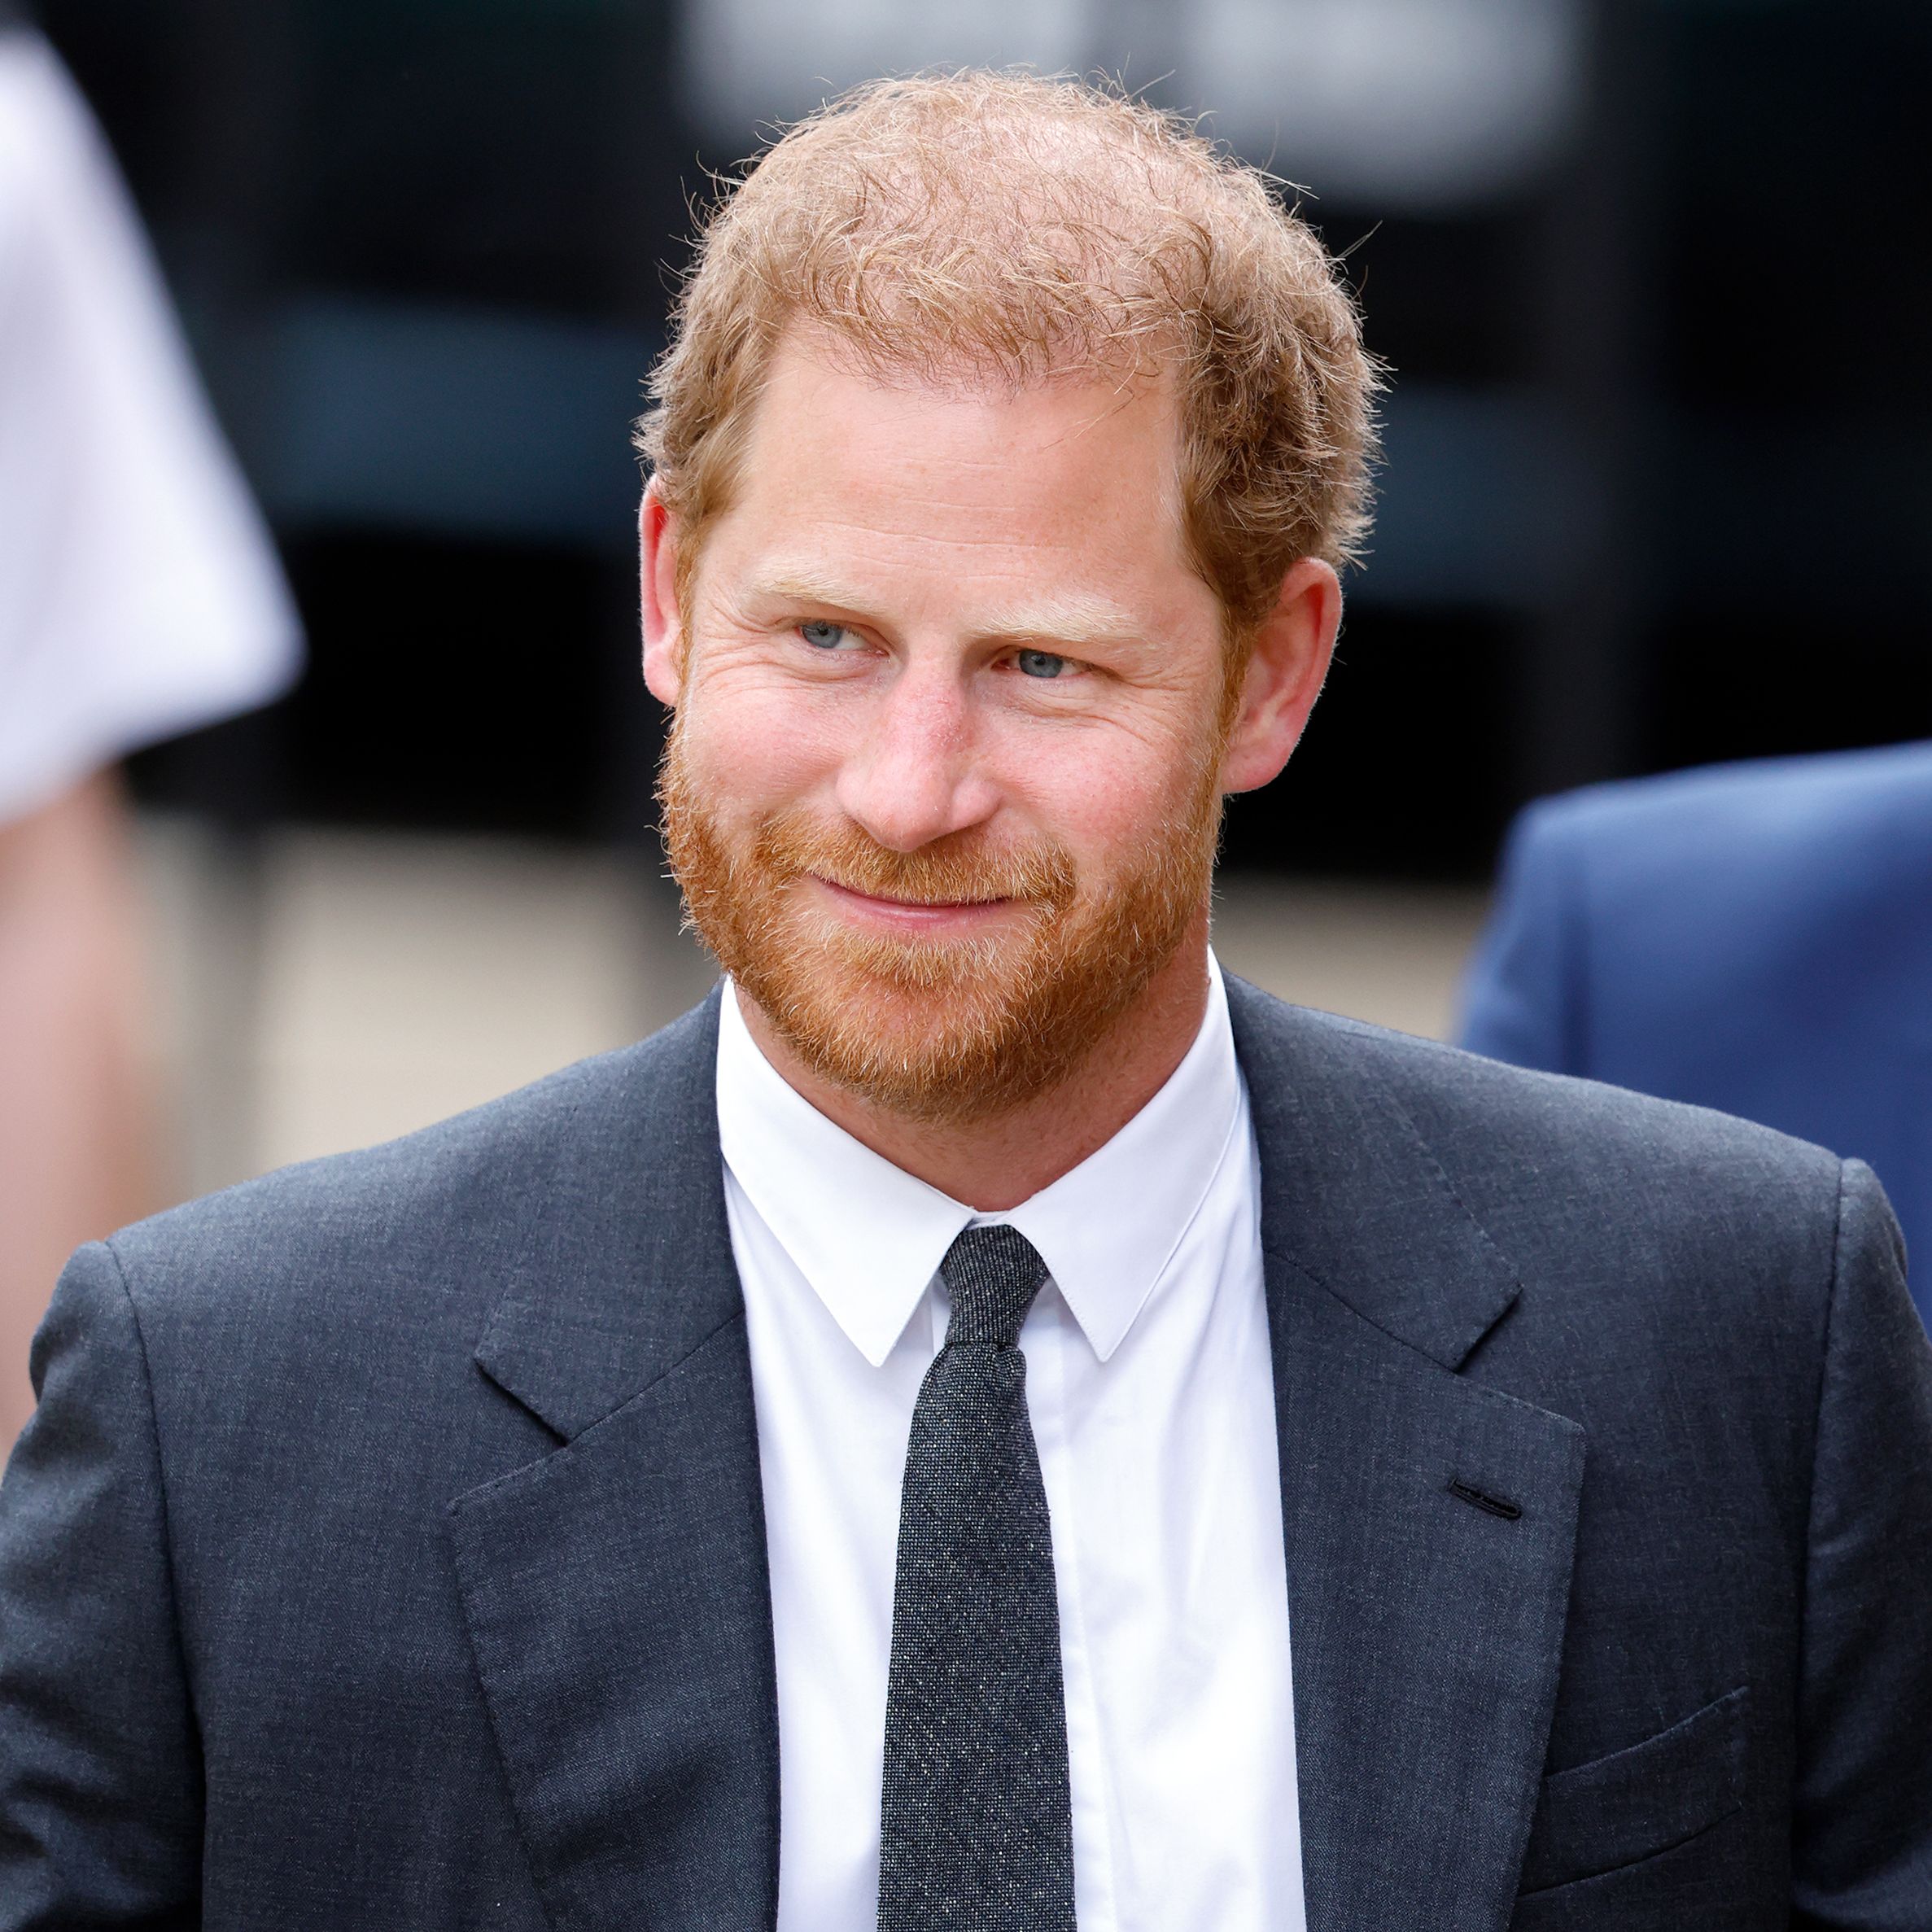 Prince Harry Loses Legal Bid to Pay for UK Police Protection